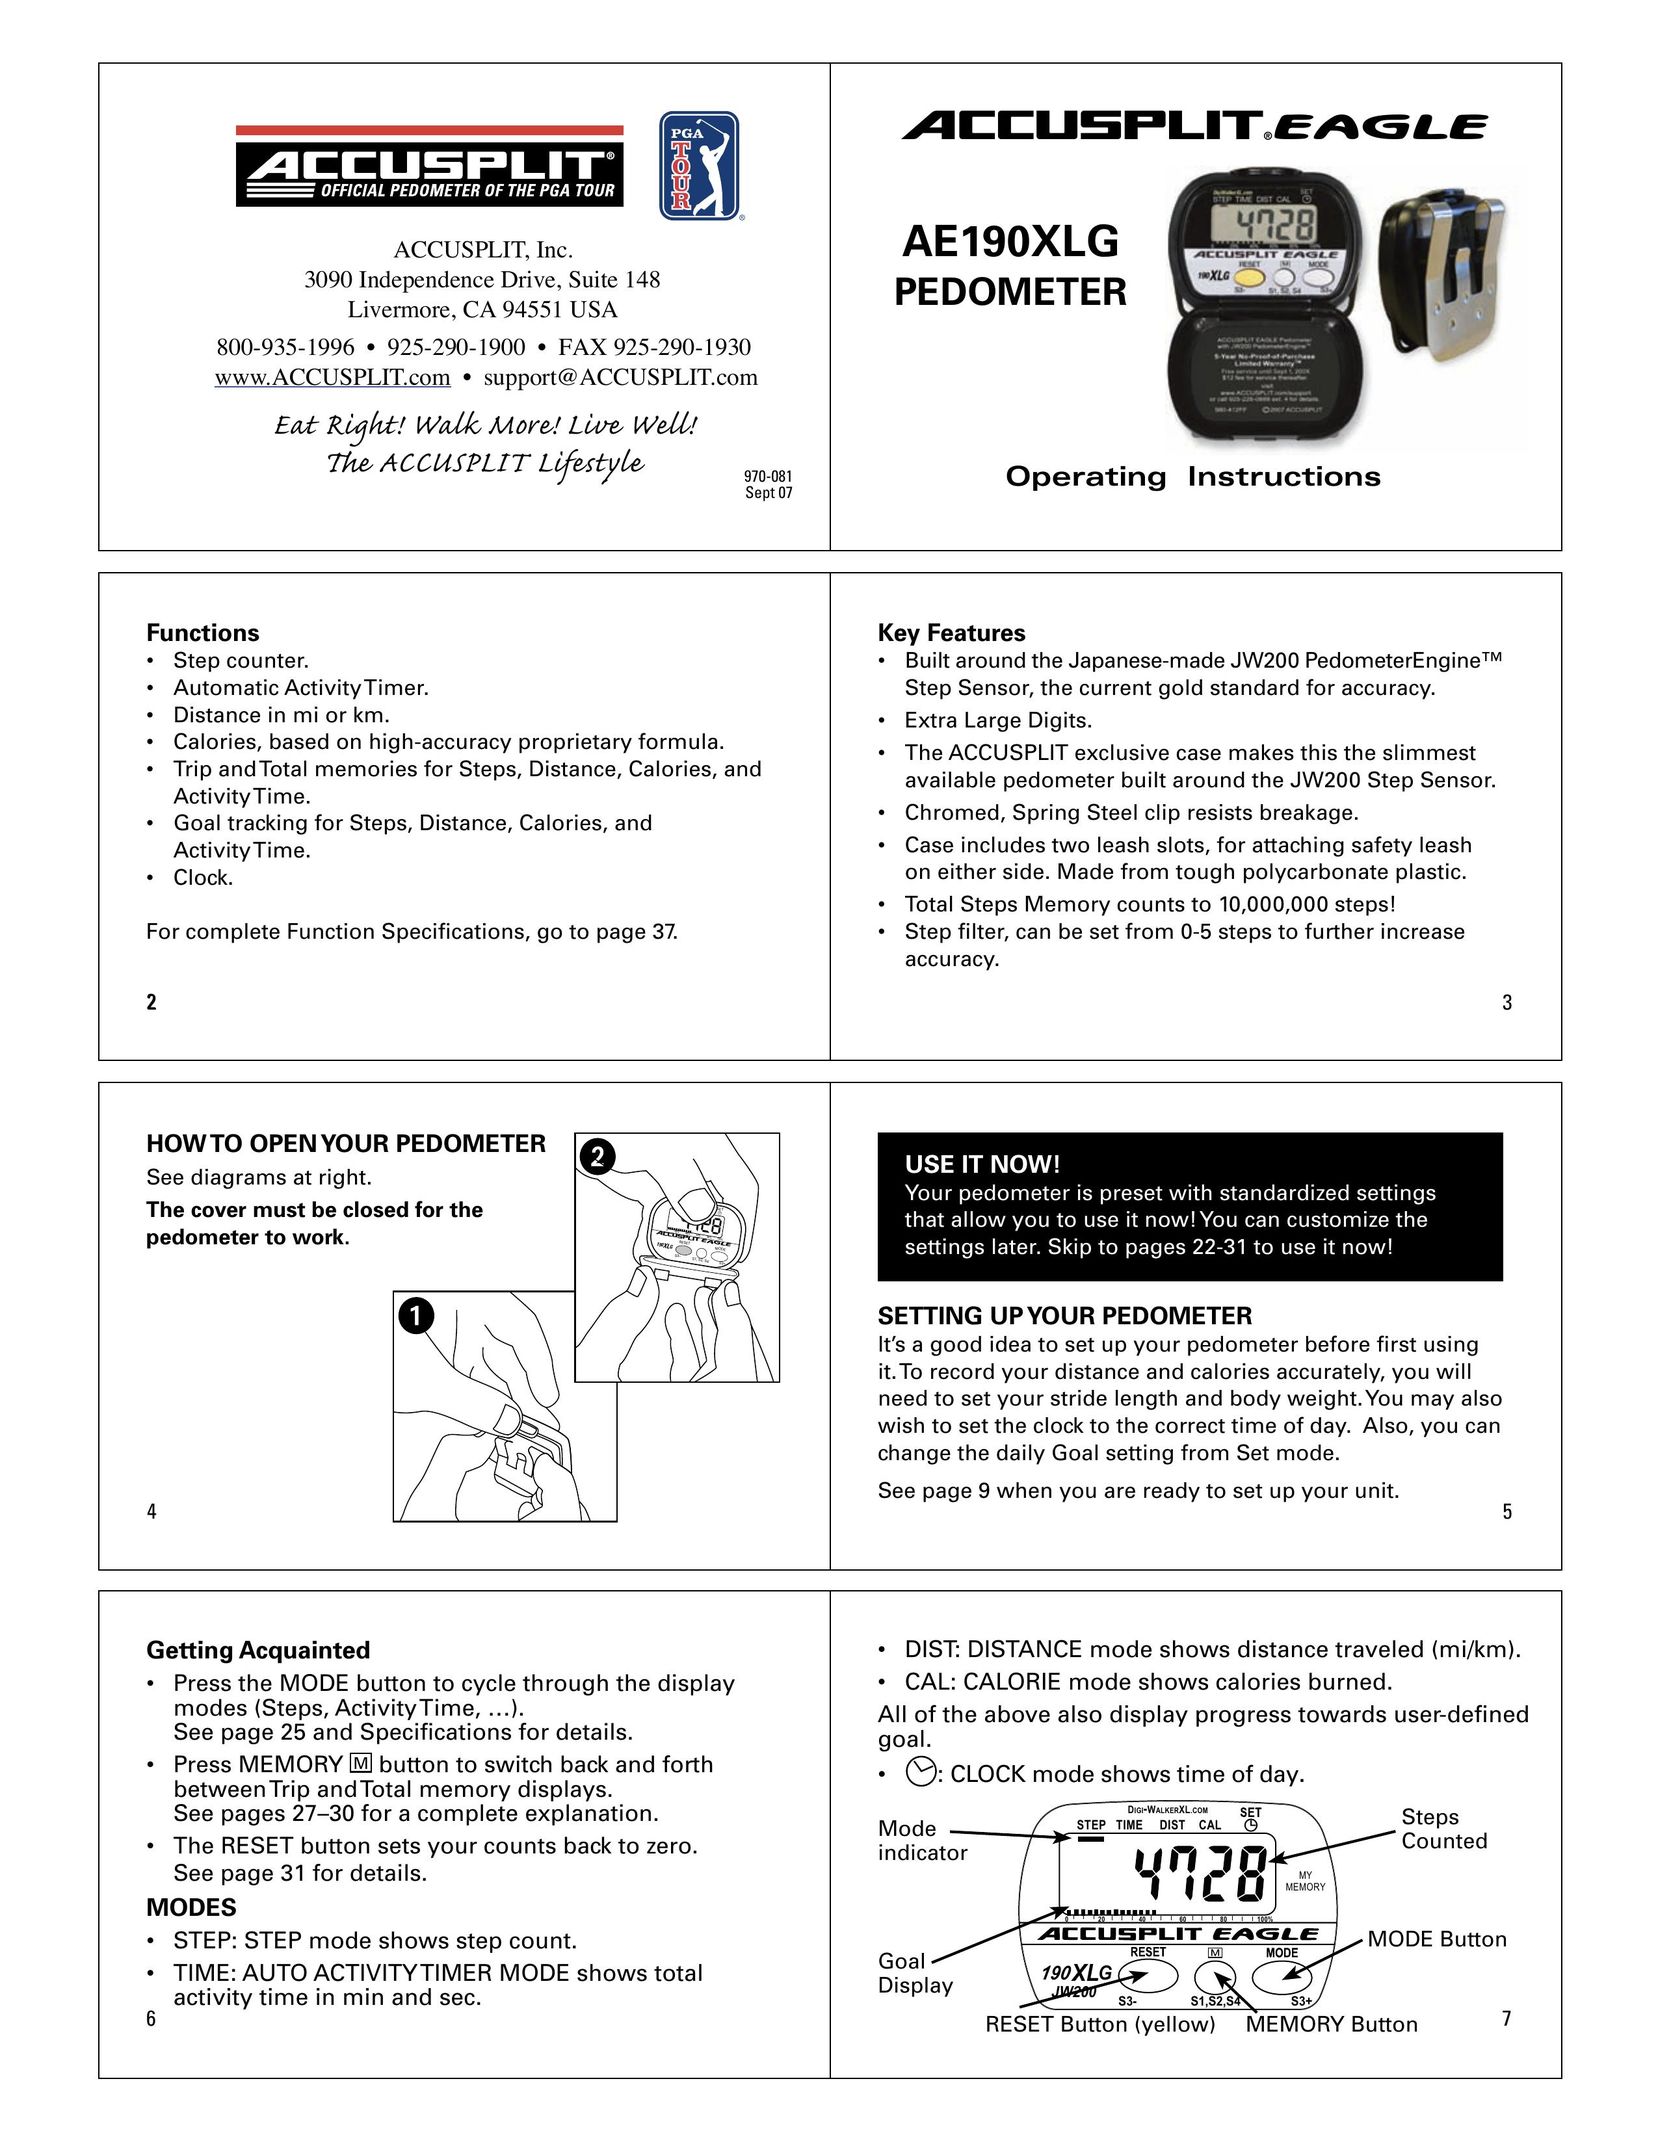 Accusplit AE190XLG Fitness Electronics User Manual